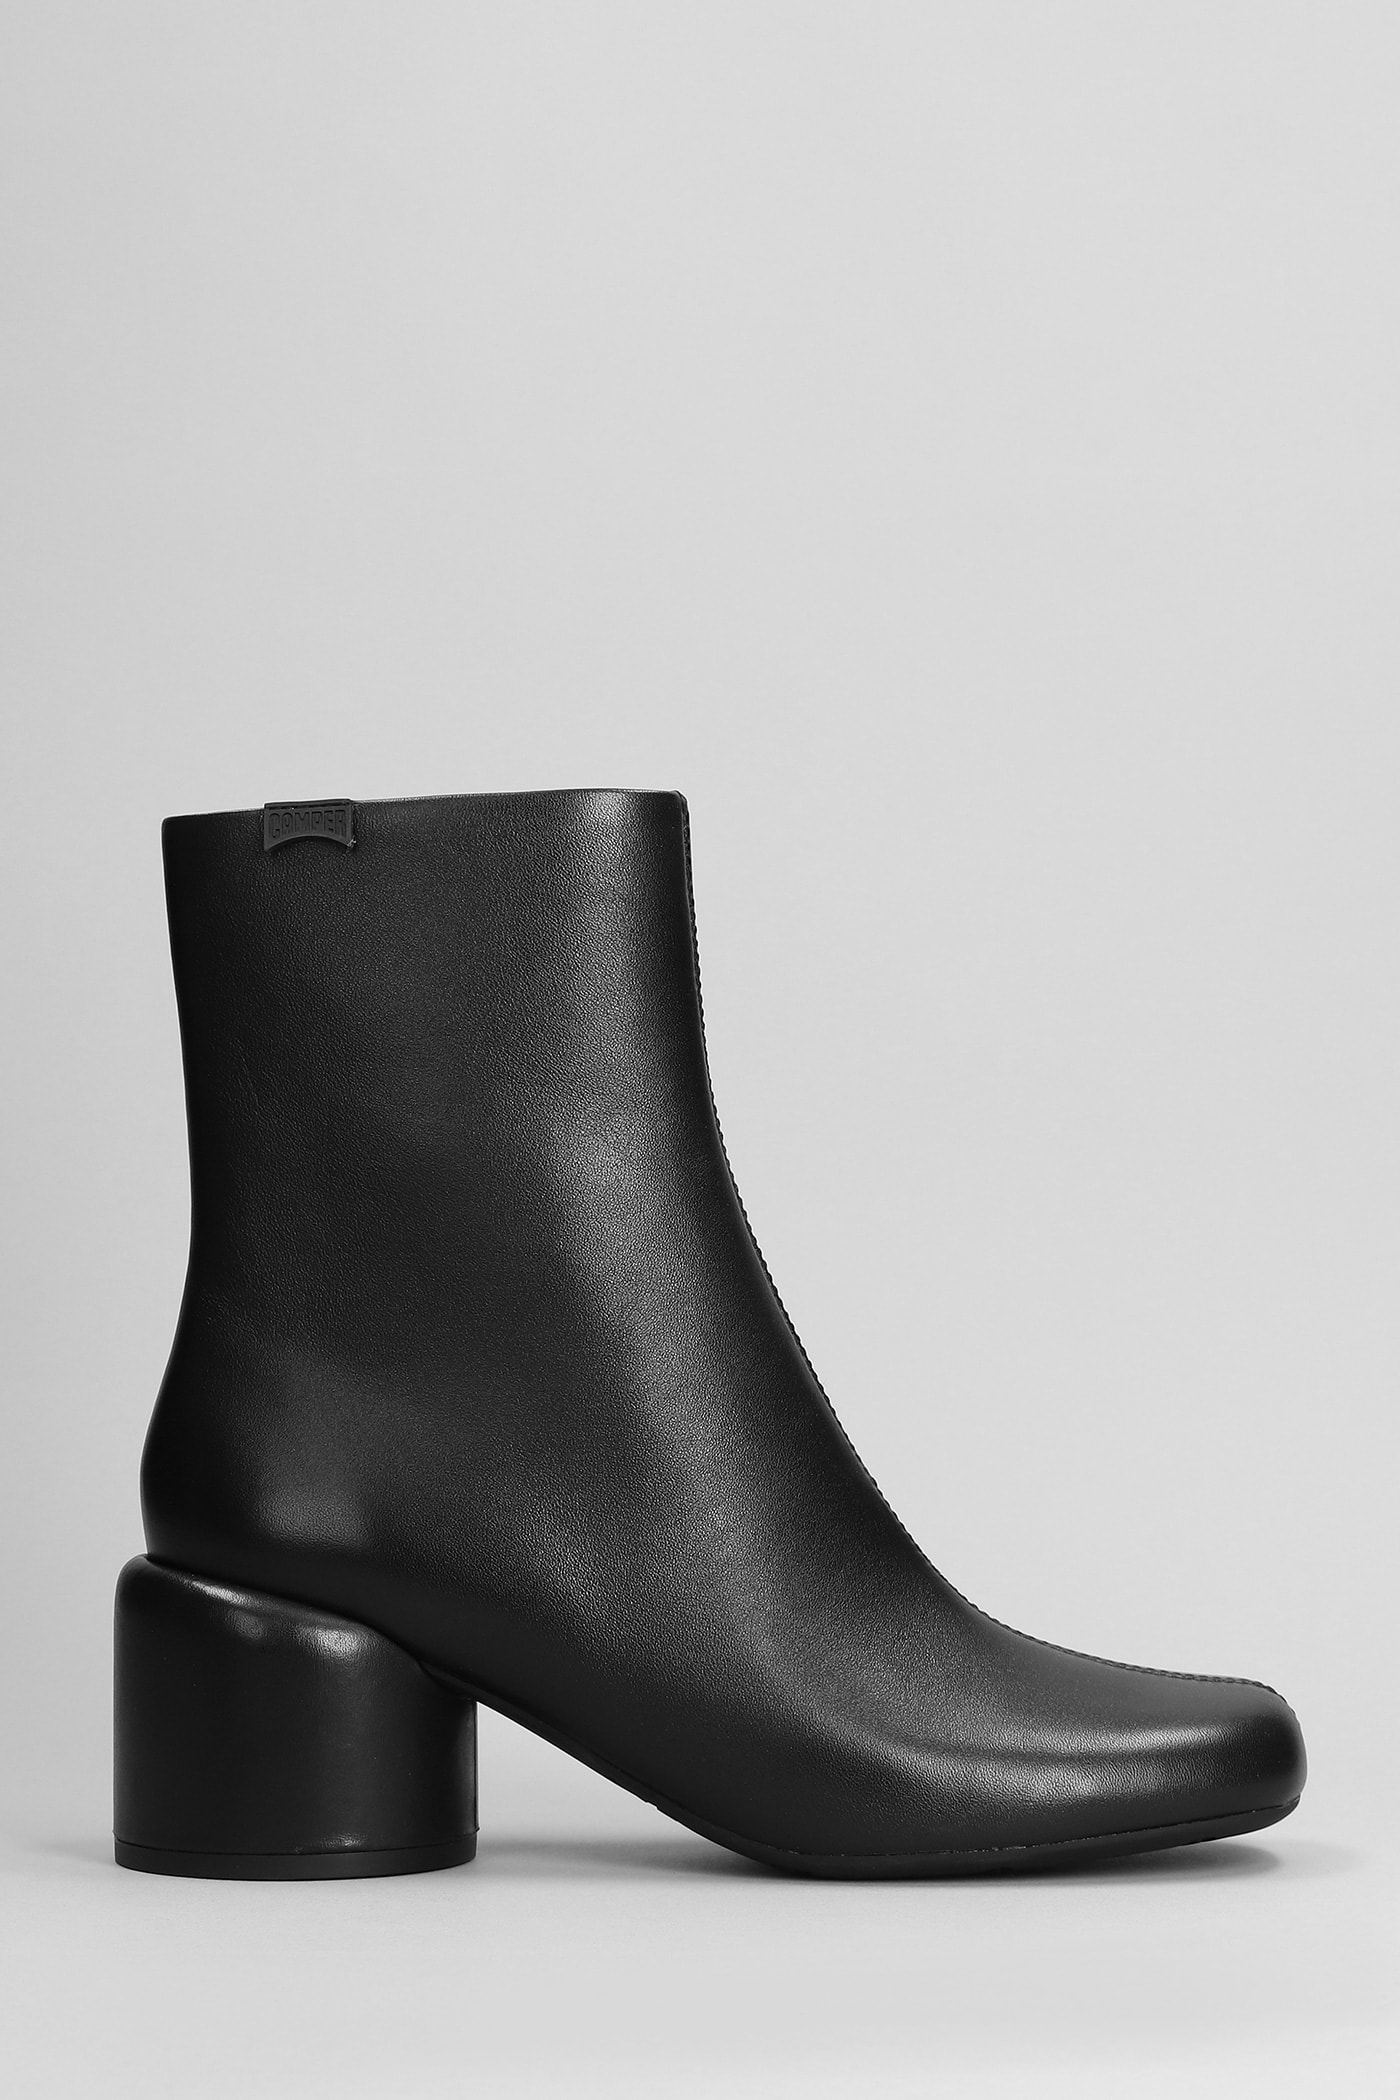 CAMPER NIKI HIGH HEELS ANKLE BOOTS IN BLACK LEATHER